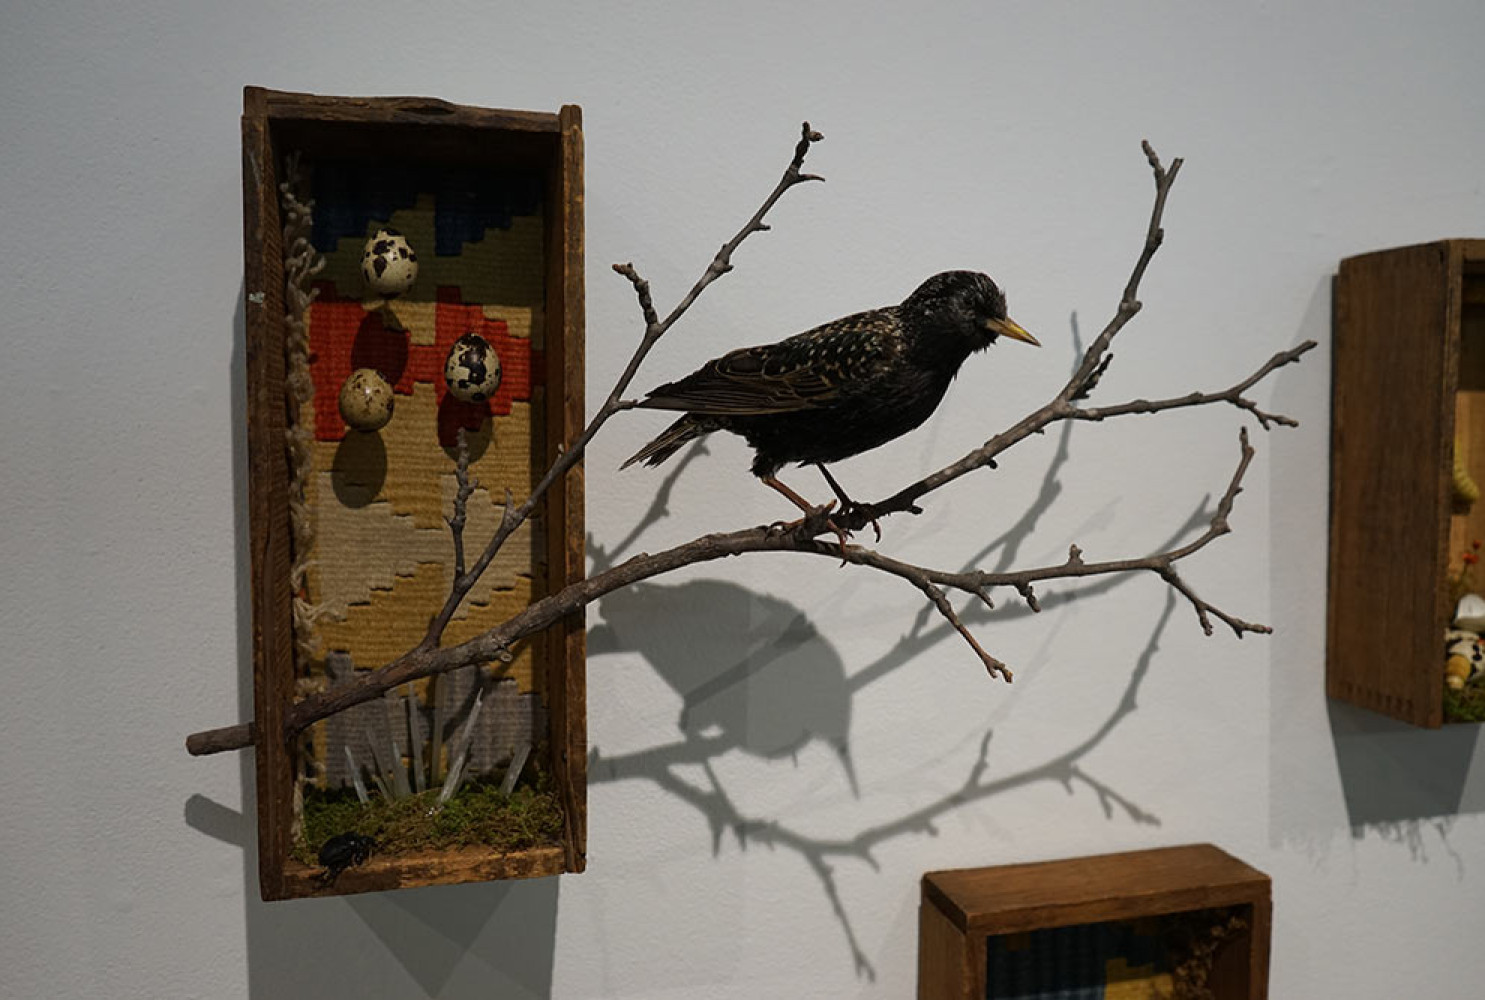 Starling made for Rufous at Redux Contemporary Art Center